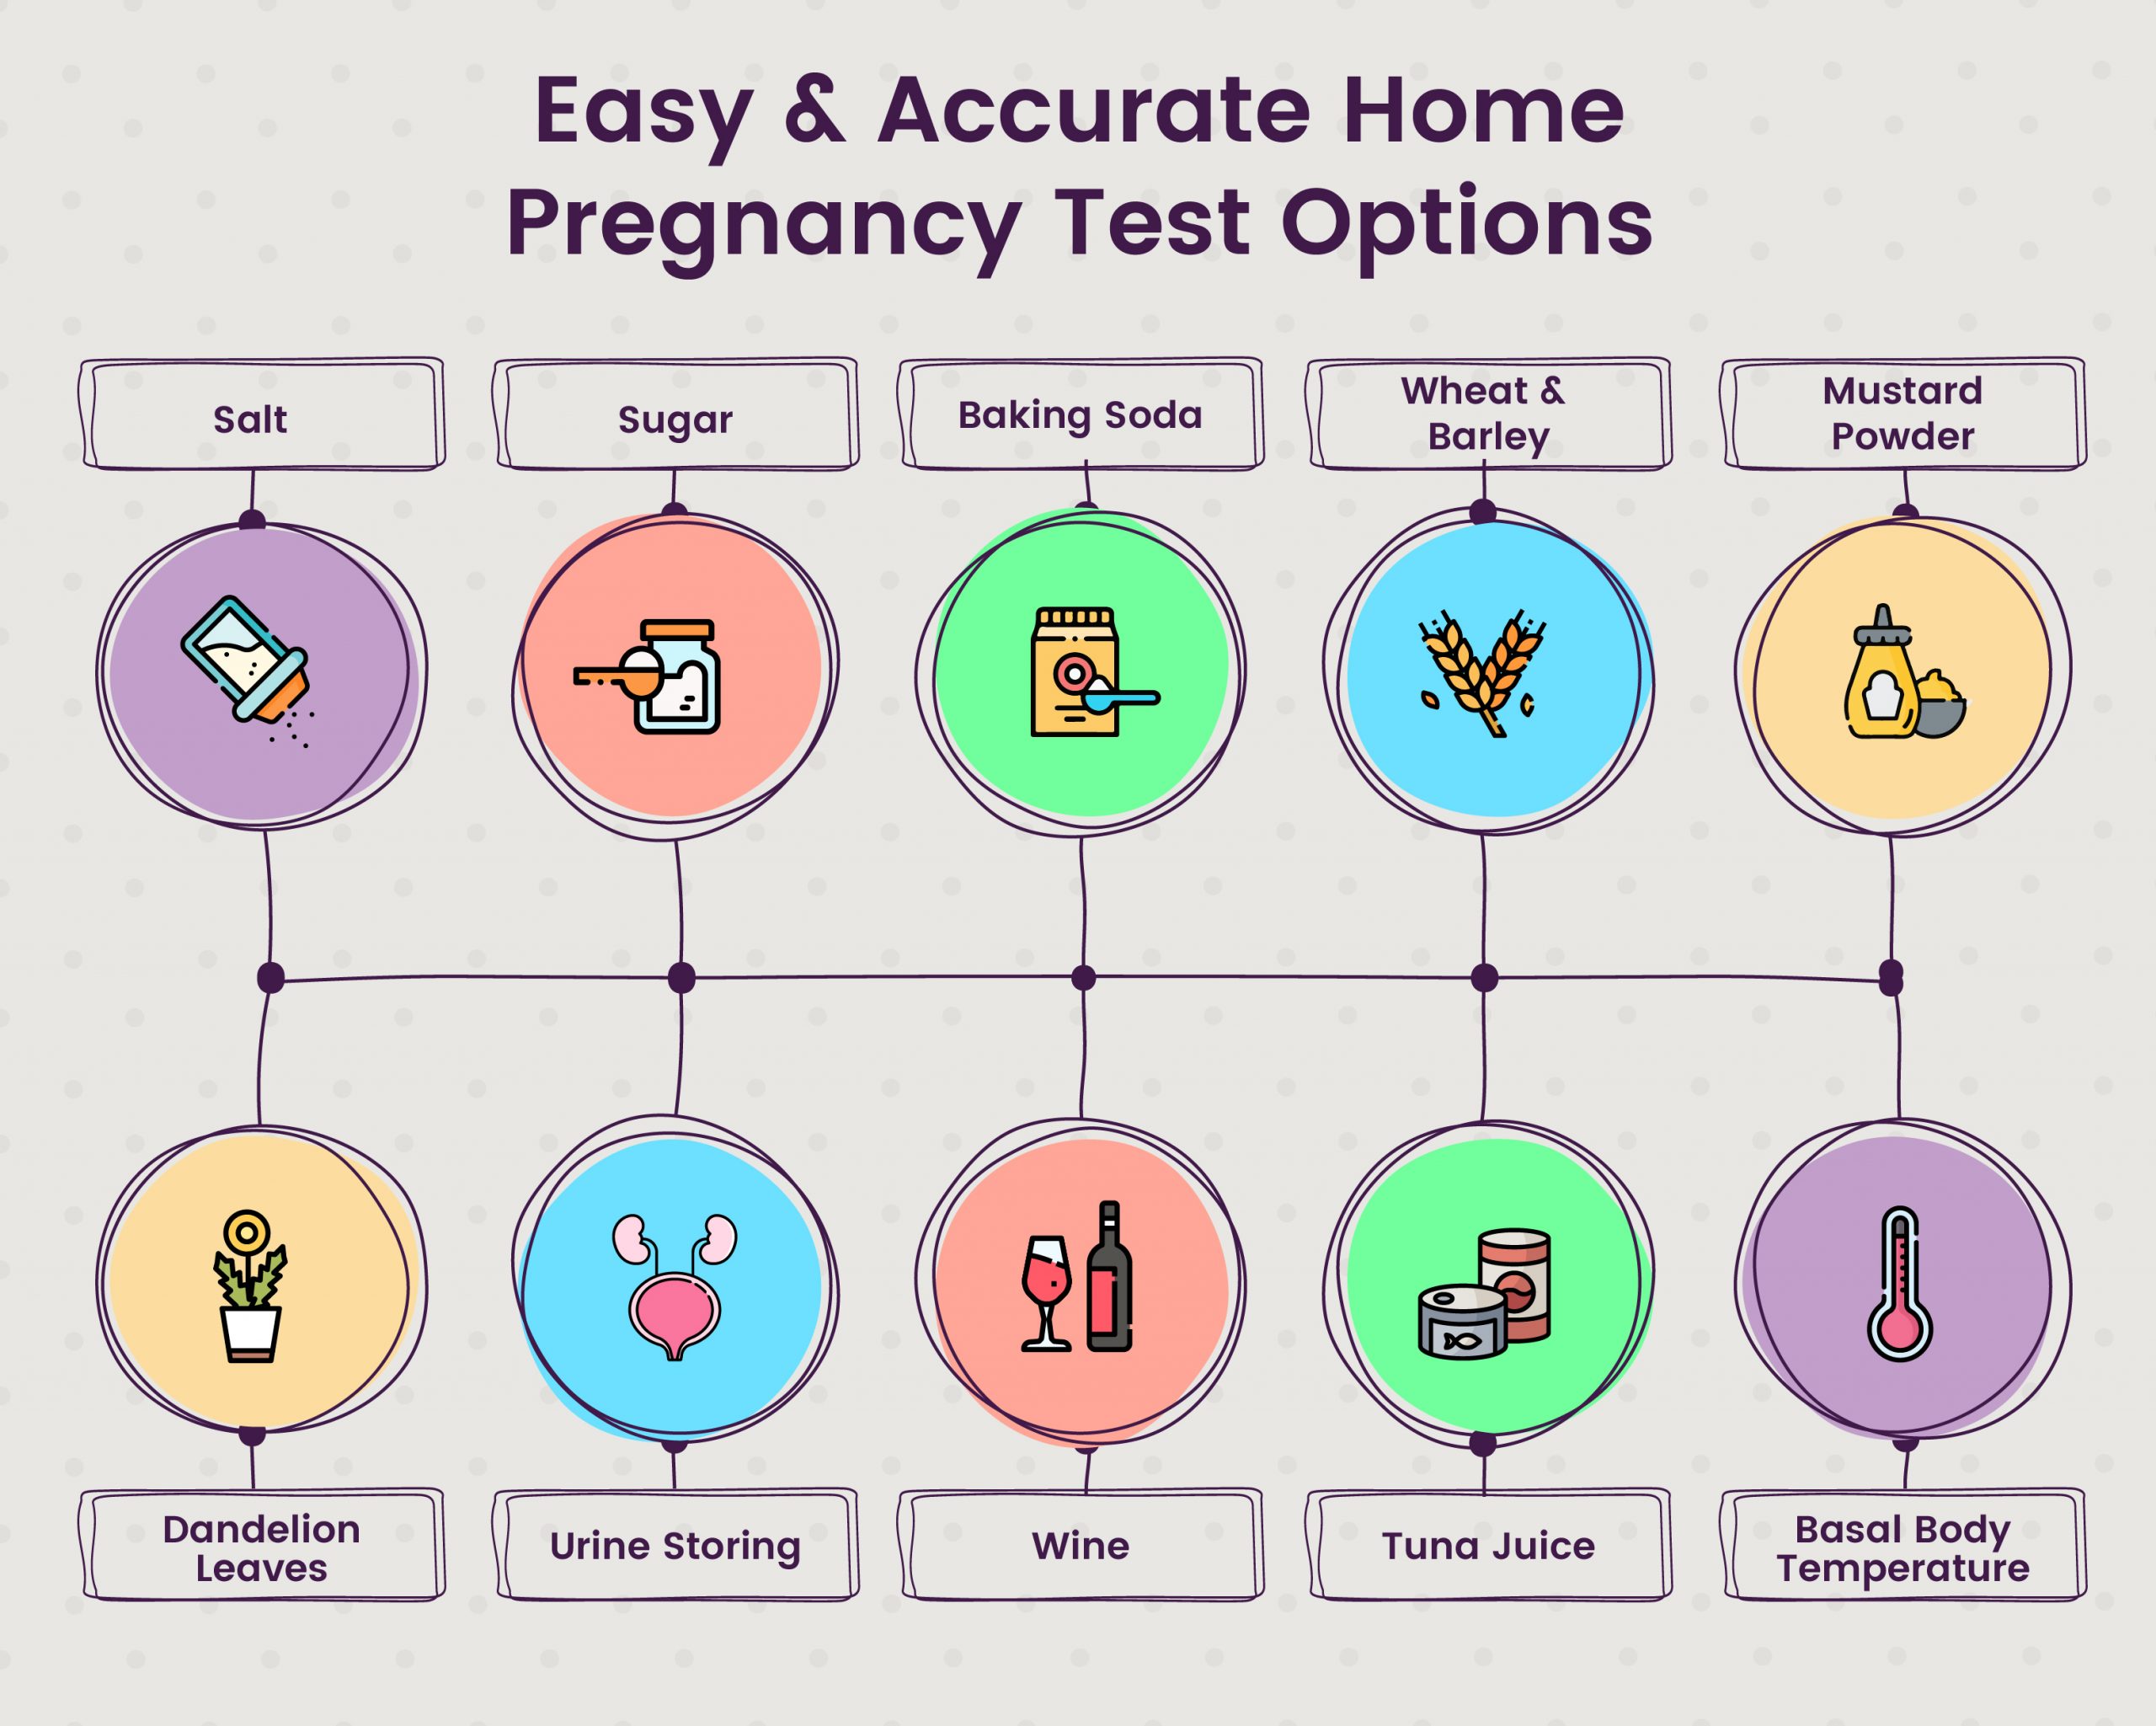 Pee is for Pregnant: The history and science of urine-based pregnancy tests  - Science in the News